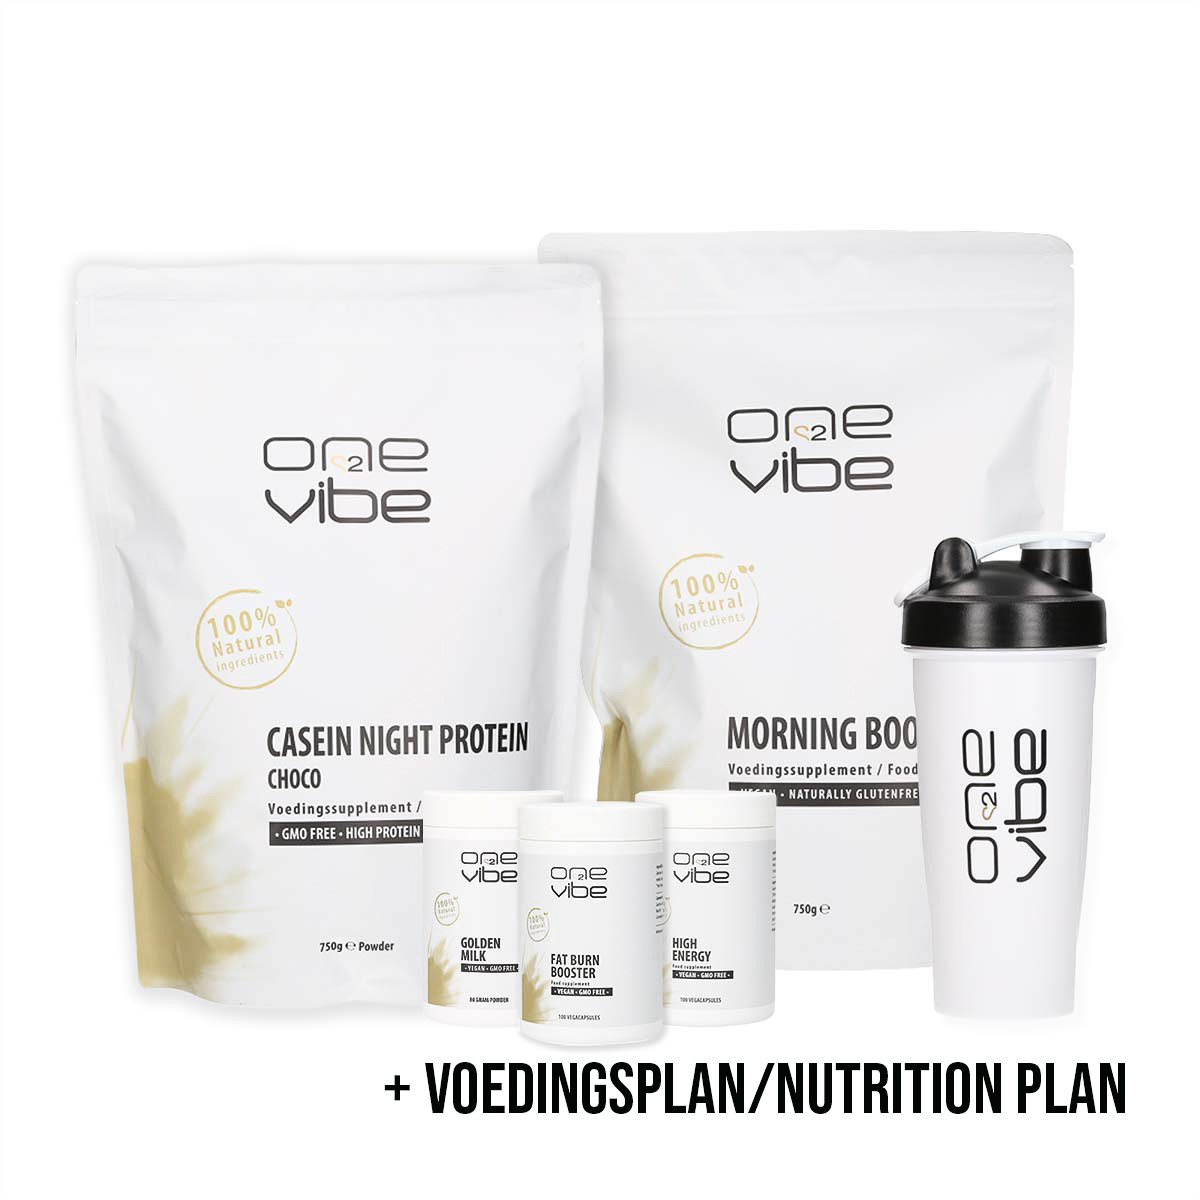 Weight loss package on fire - choco | One2Vibe